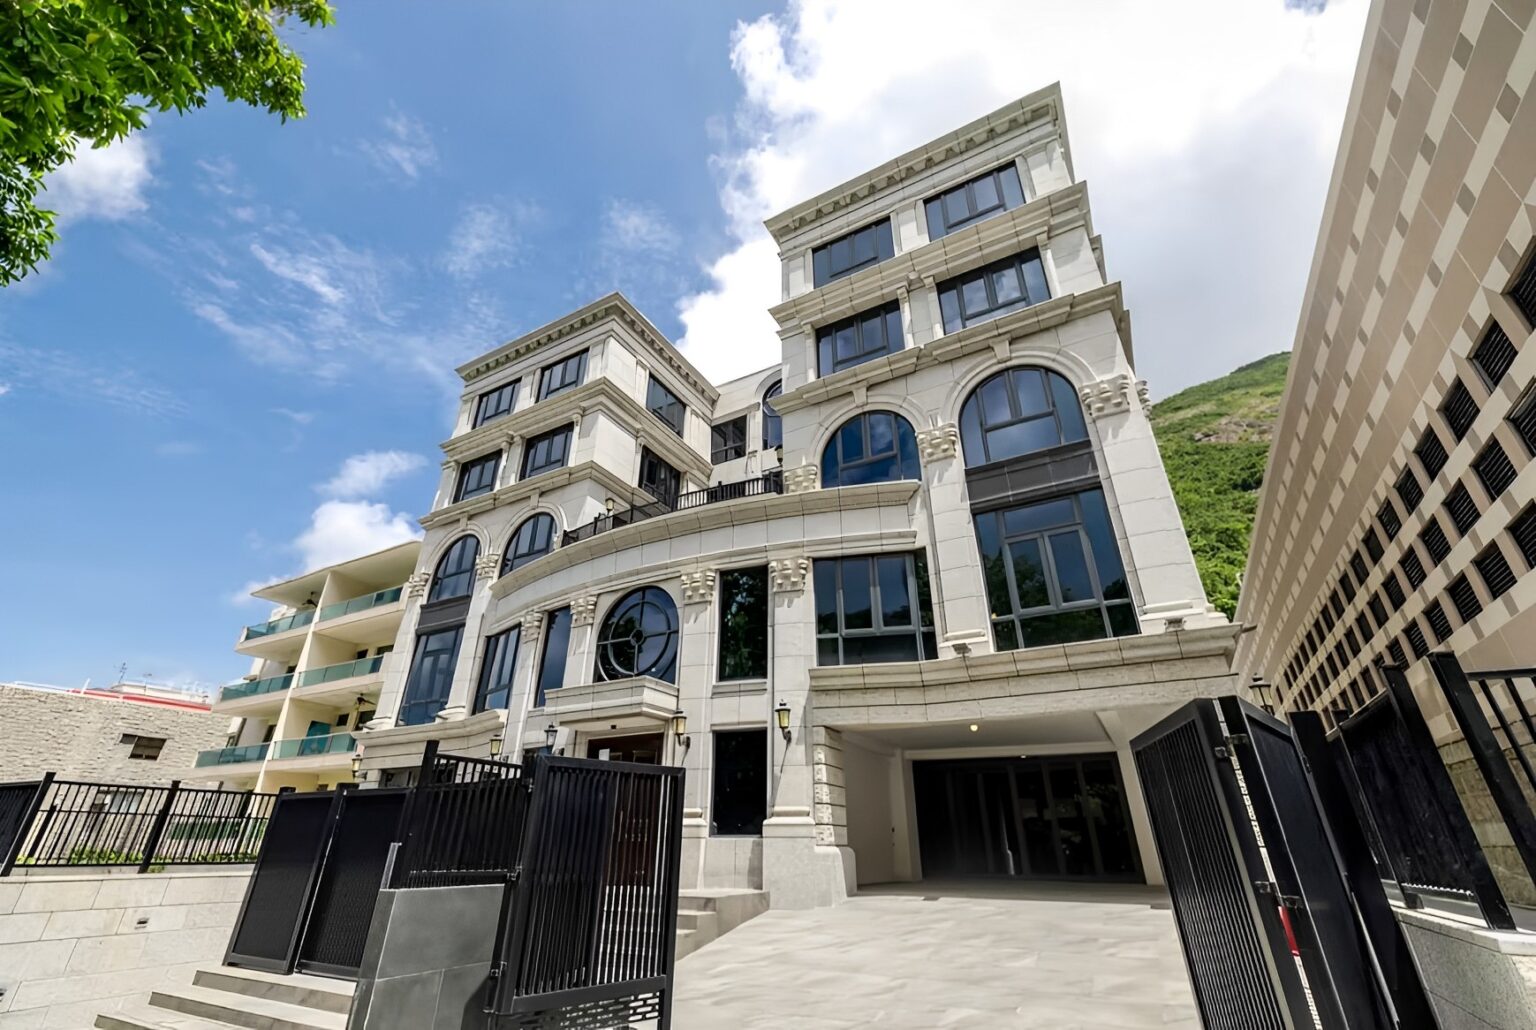 The entrance to a five-storey townhouse in Repulse Bay in Hong Kong.